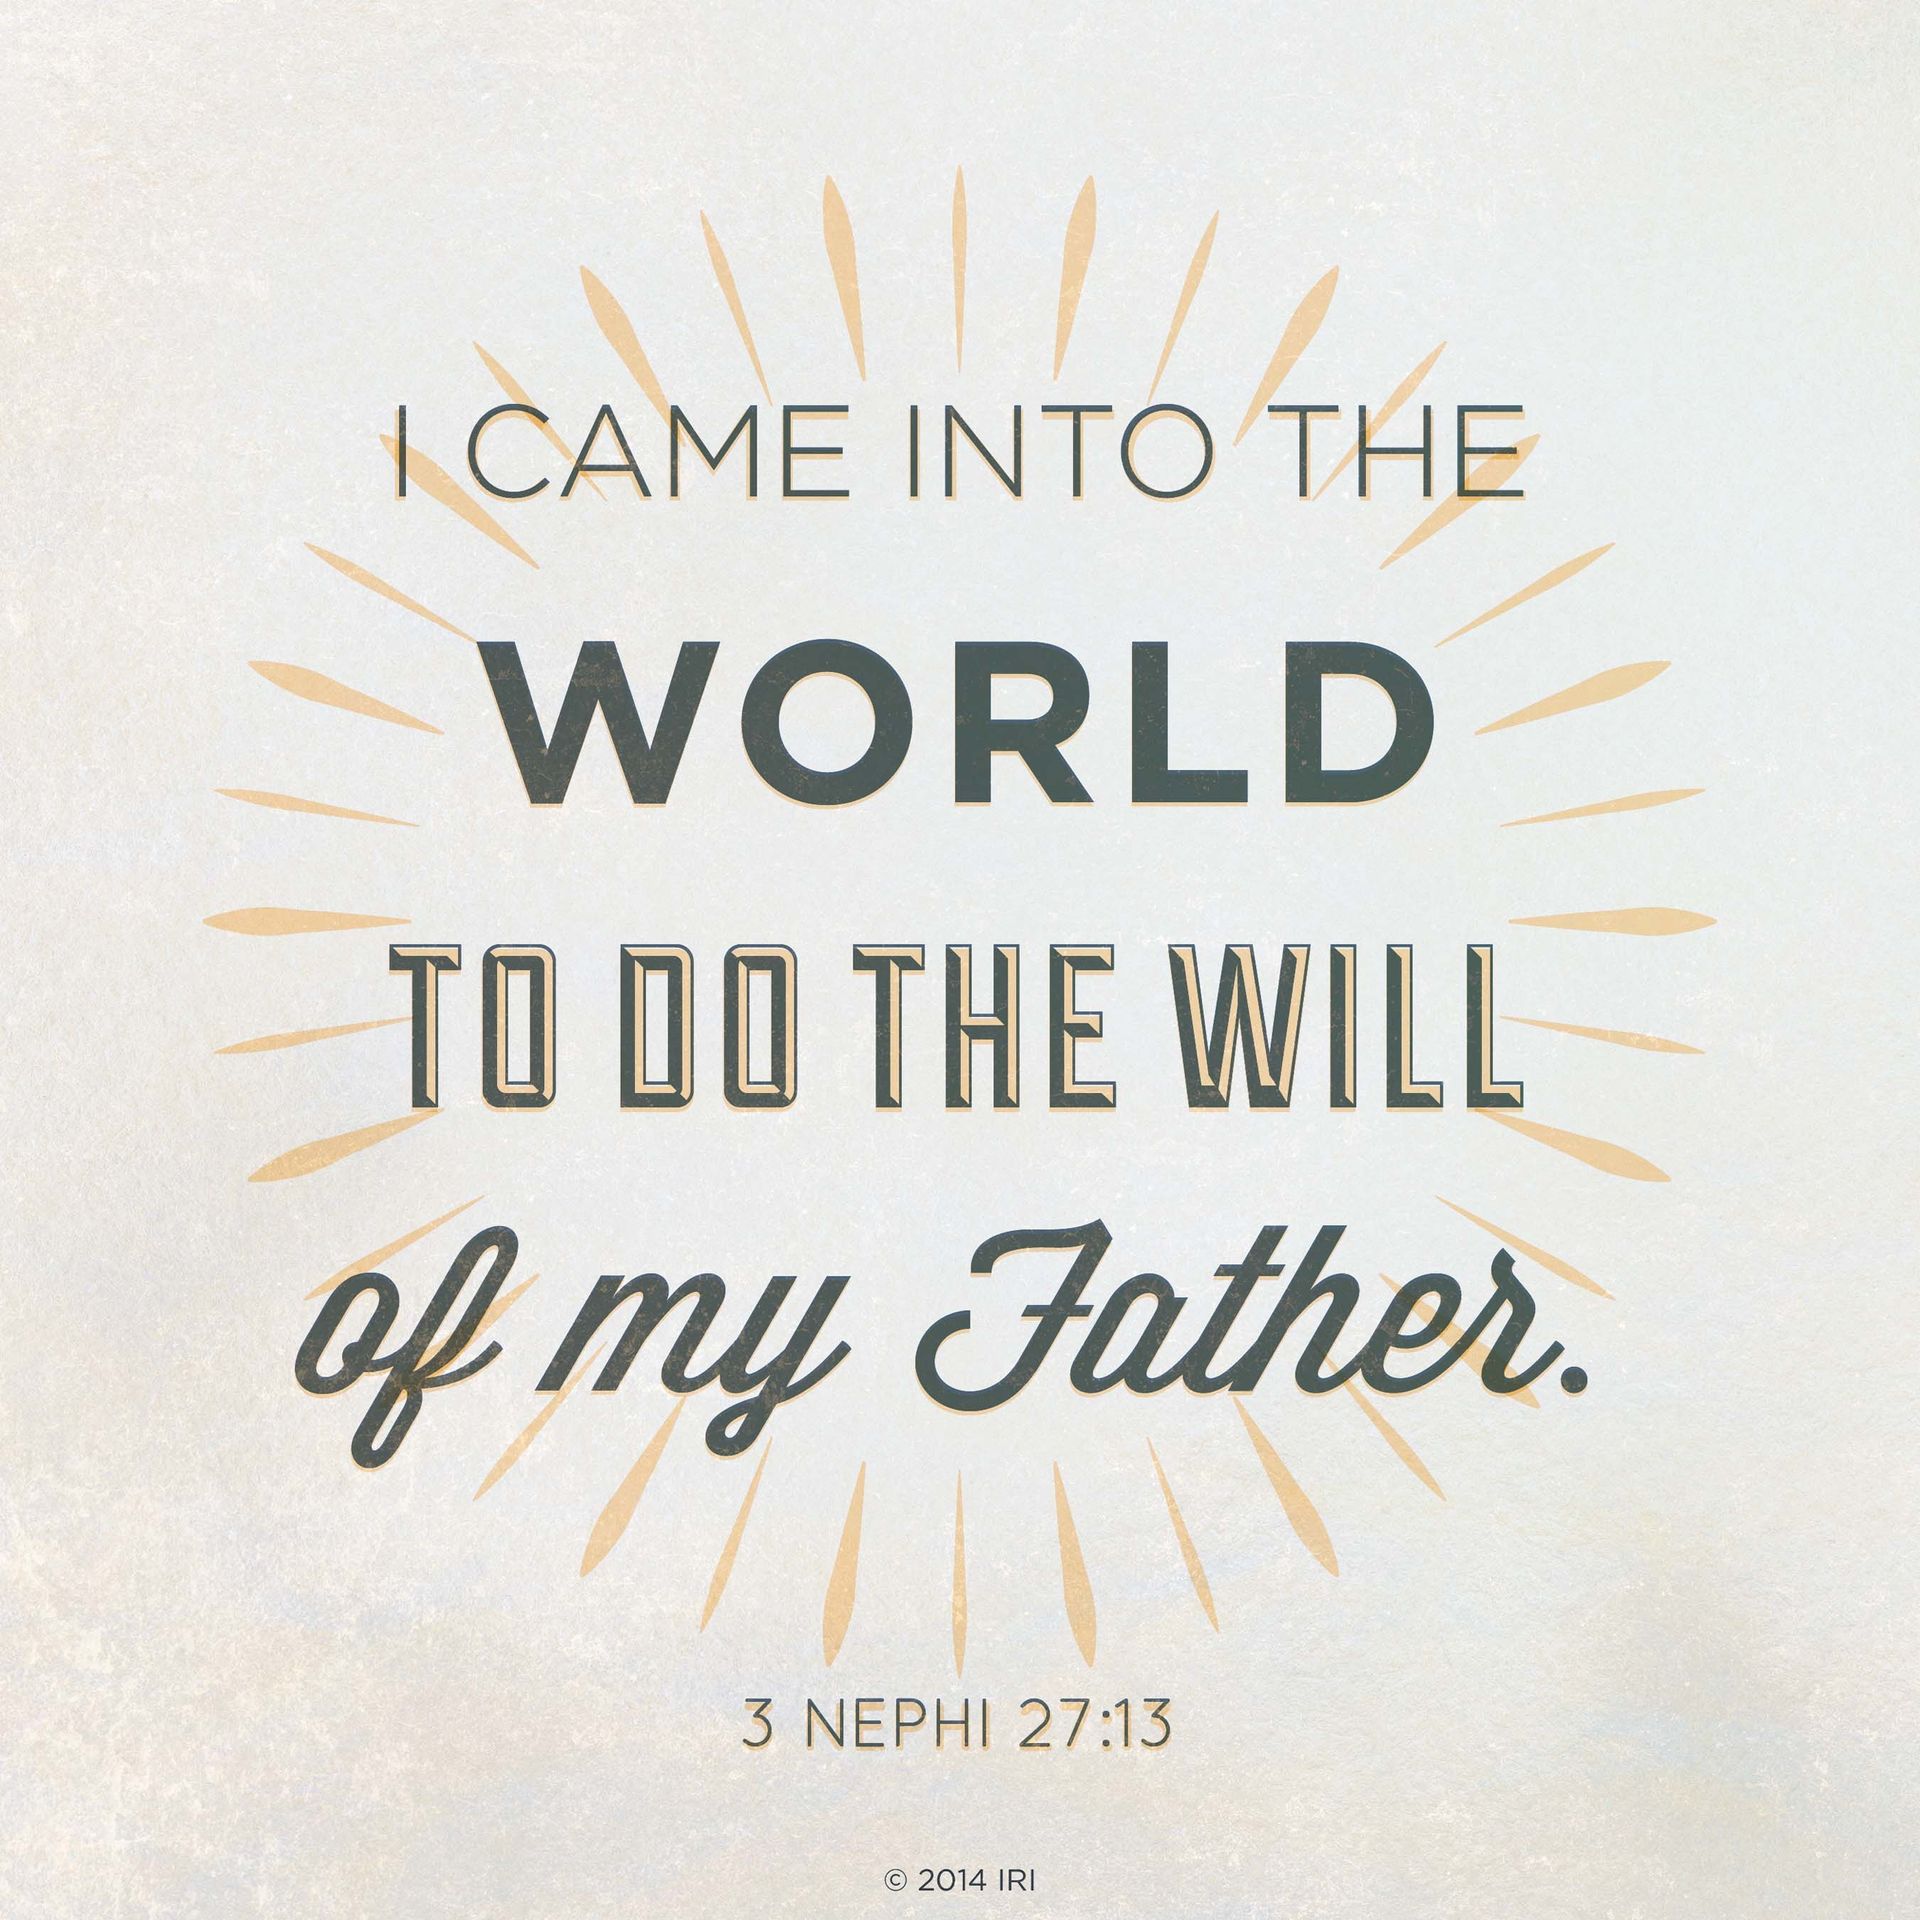 “I came into the world to do the will of my Father.”—3 Nephi 27:13